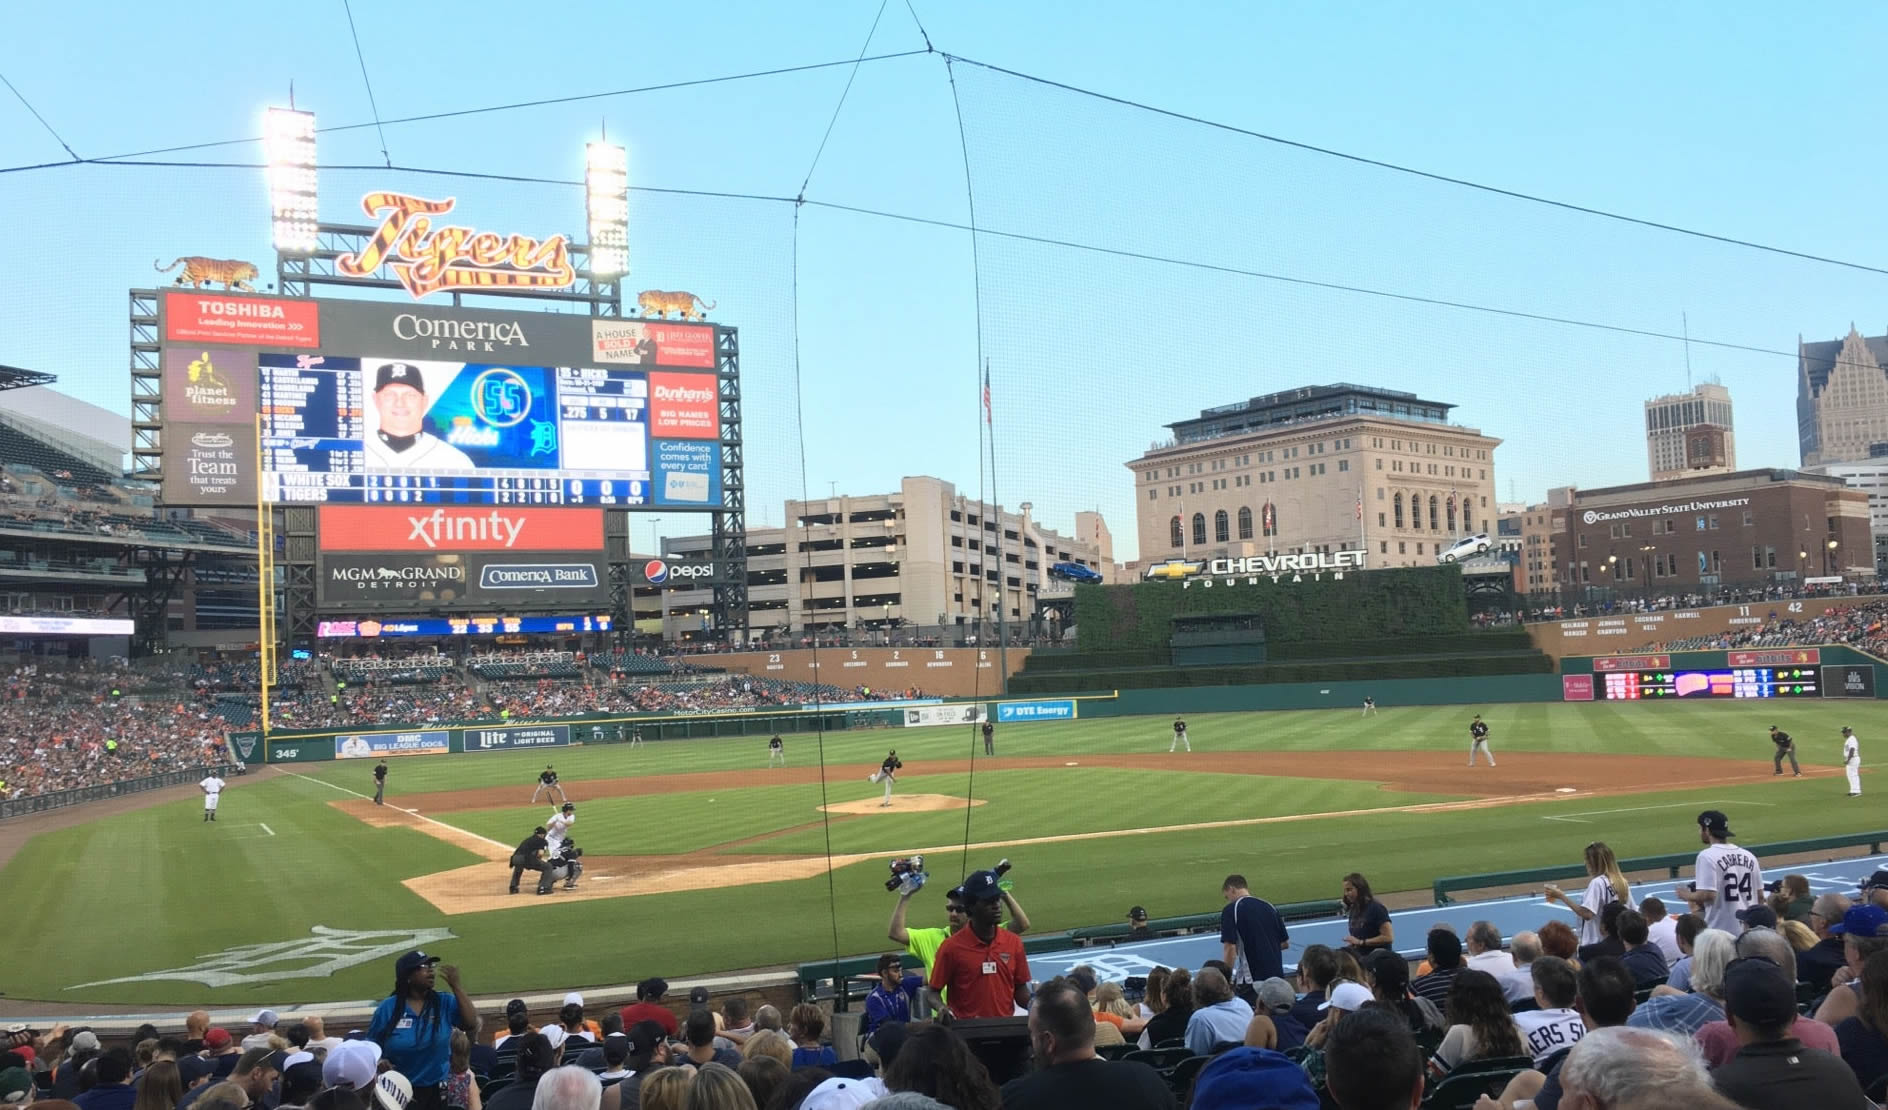 section 125, row 15 seat view  for baseball - comerica park